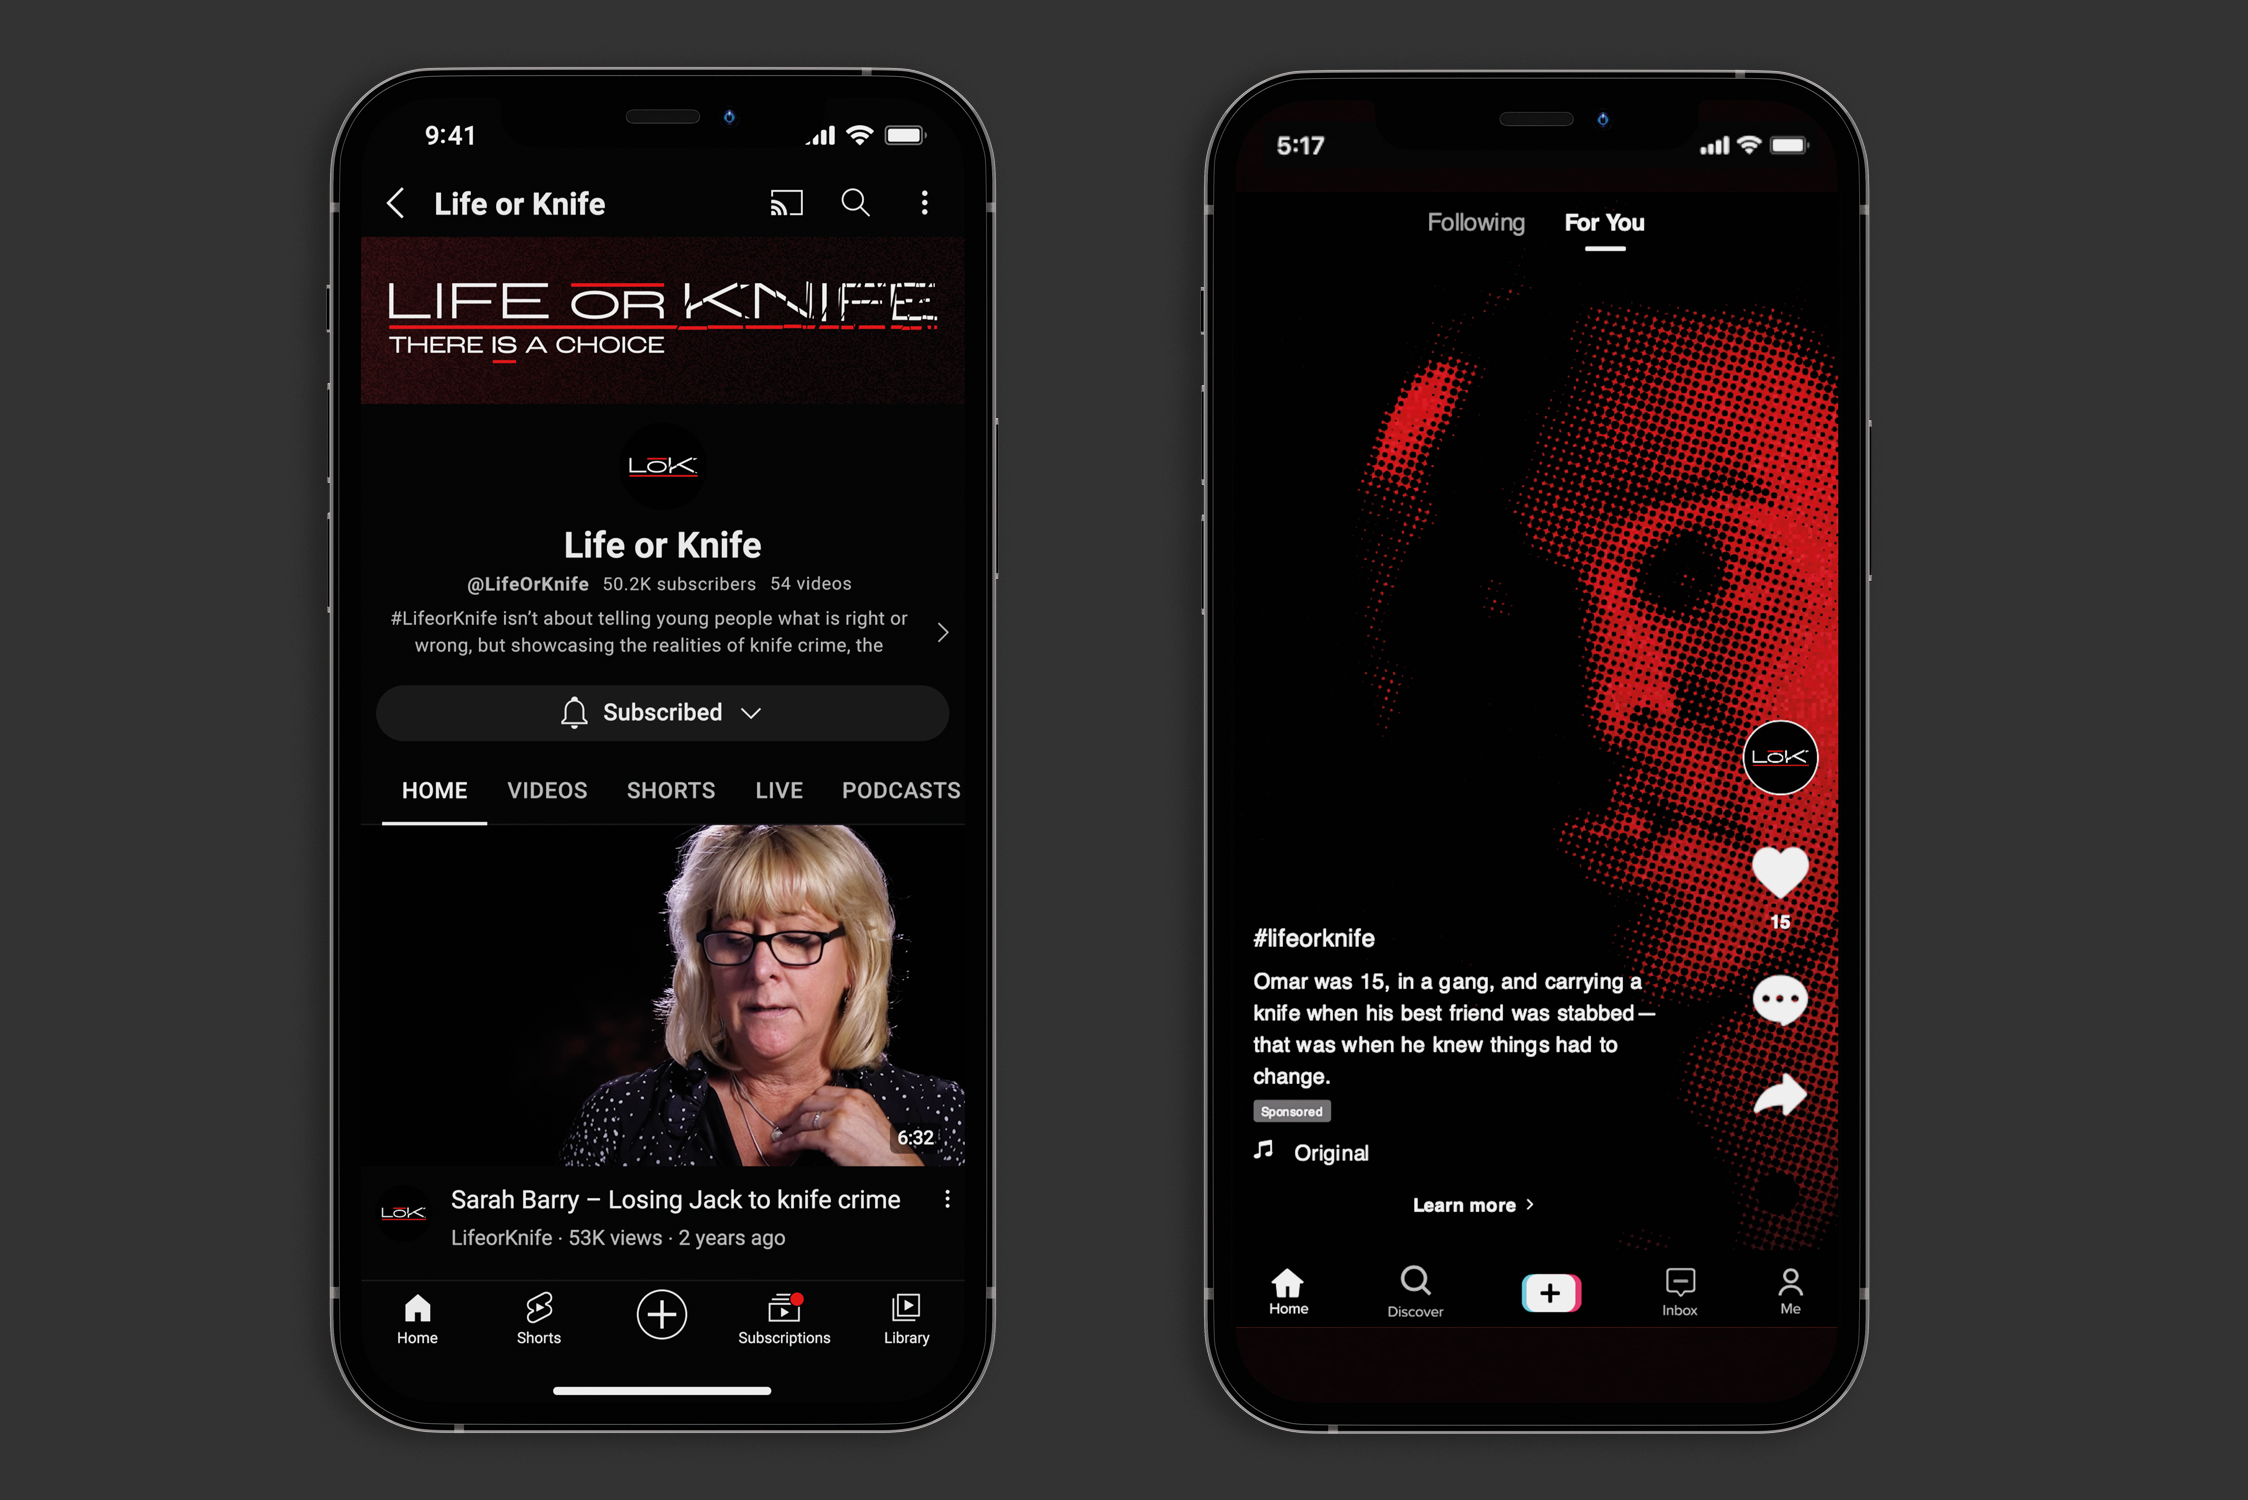 Image of two mobiles side by side. The left-hand phone displays a Life or Knife branded YouTube channel, with a video interview with the mother of a knife crime victim. The right hand mobile displays a TikTok advert utilising an interview with a former gang member.